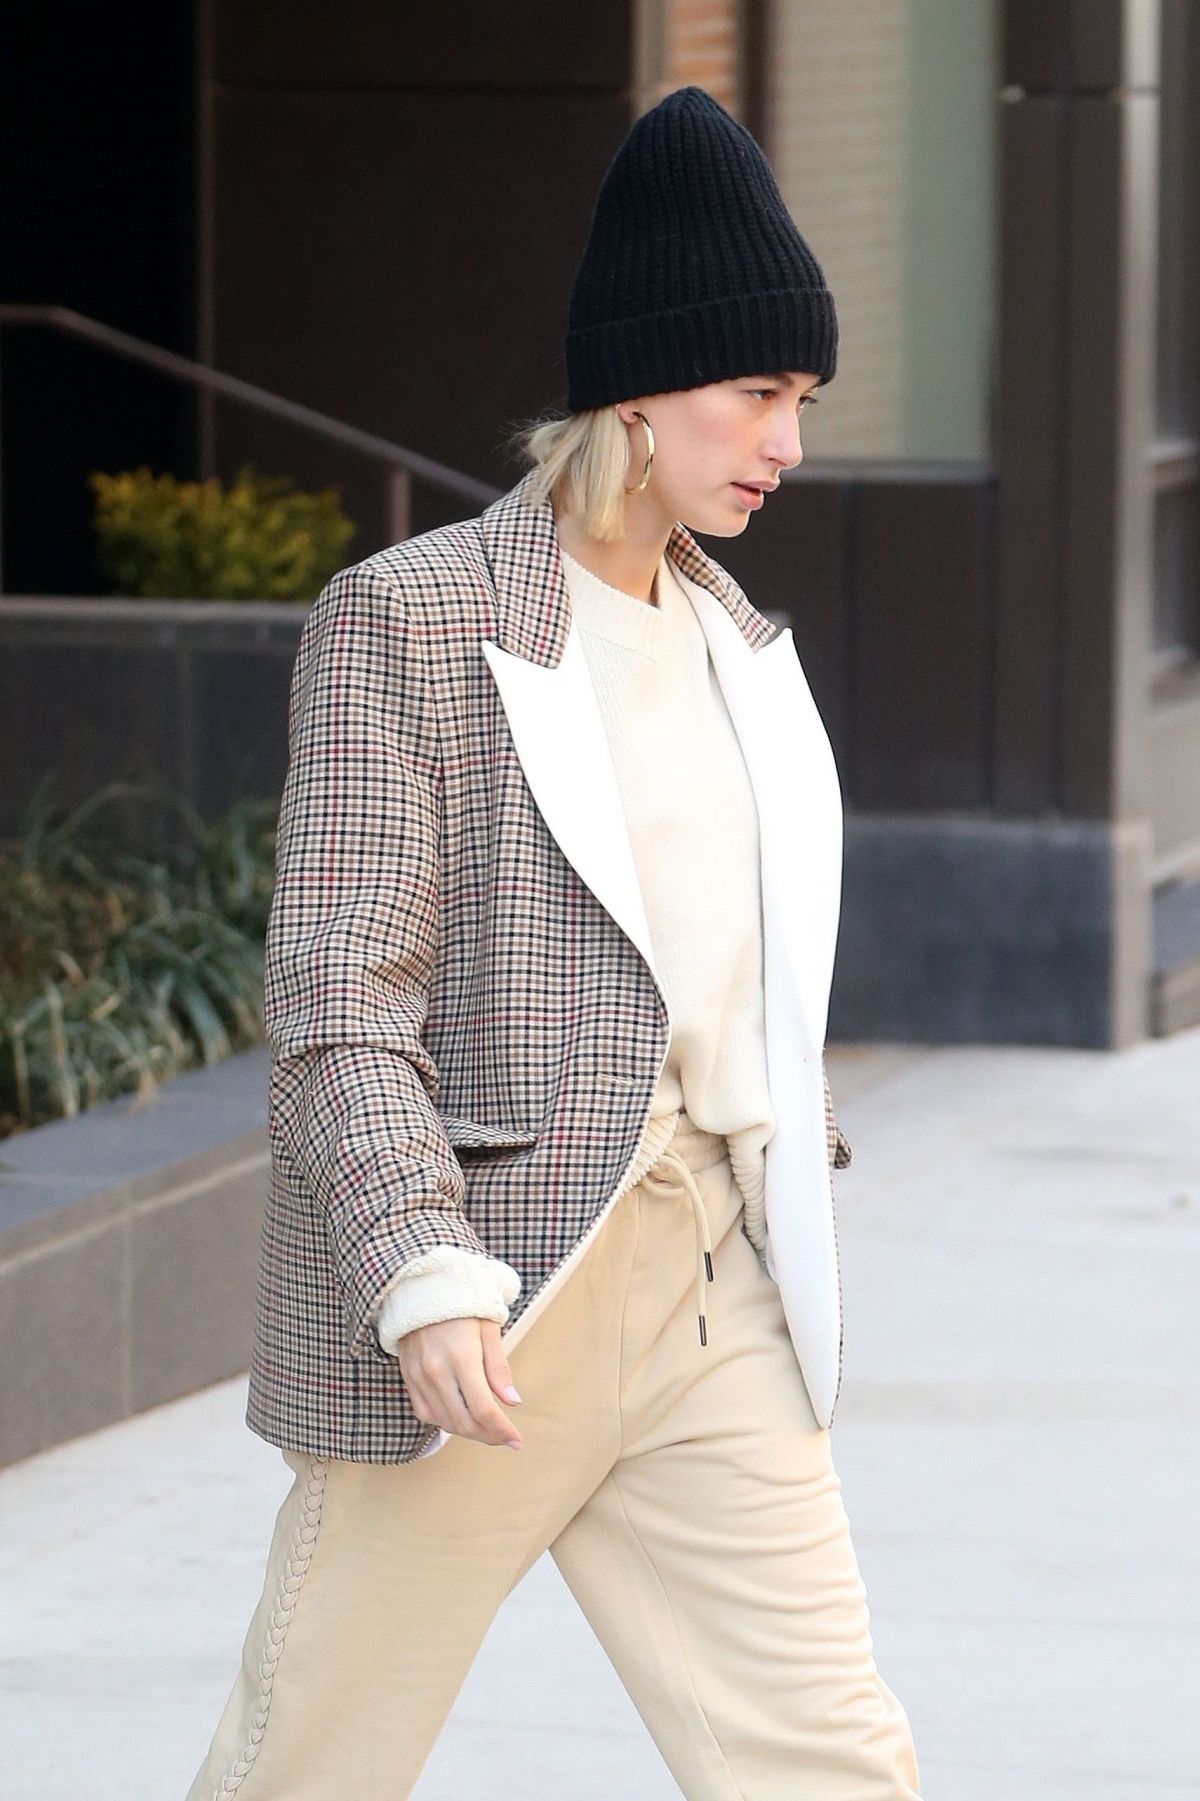 hailey-bieber-out-and-about-in-new-york-02-26-2019-4.jpg